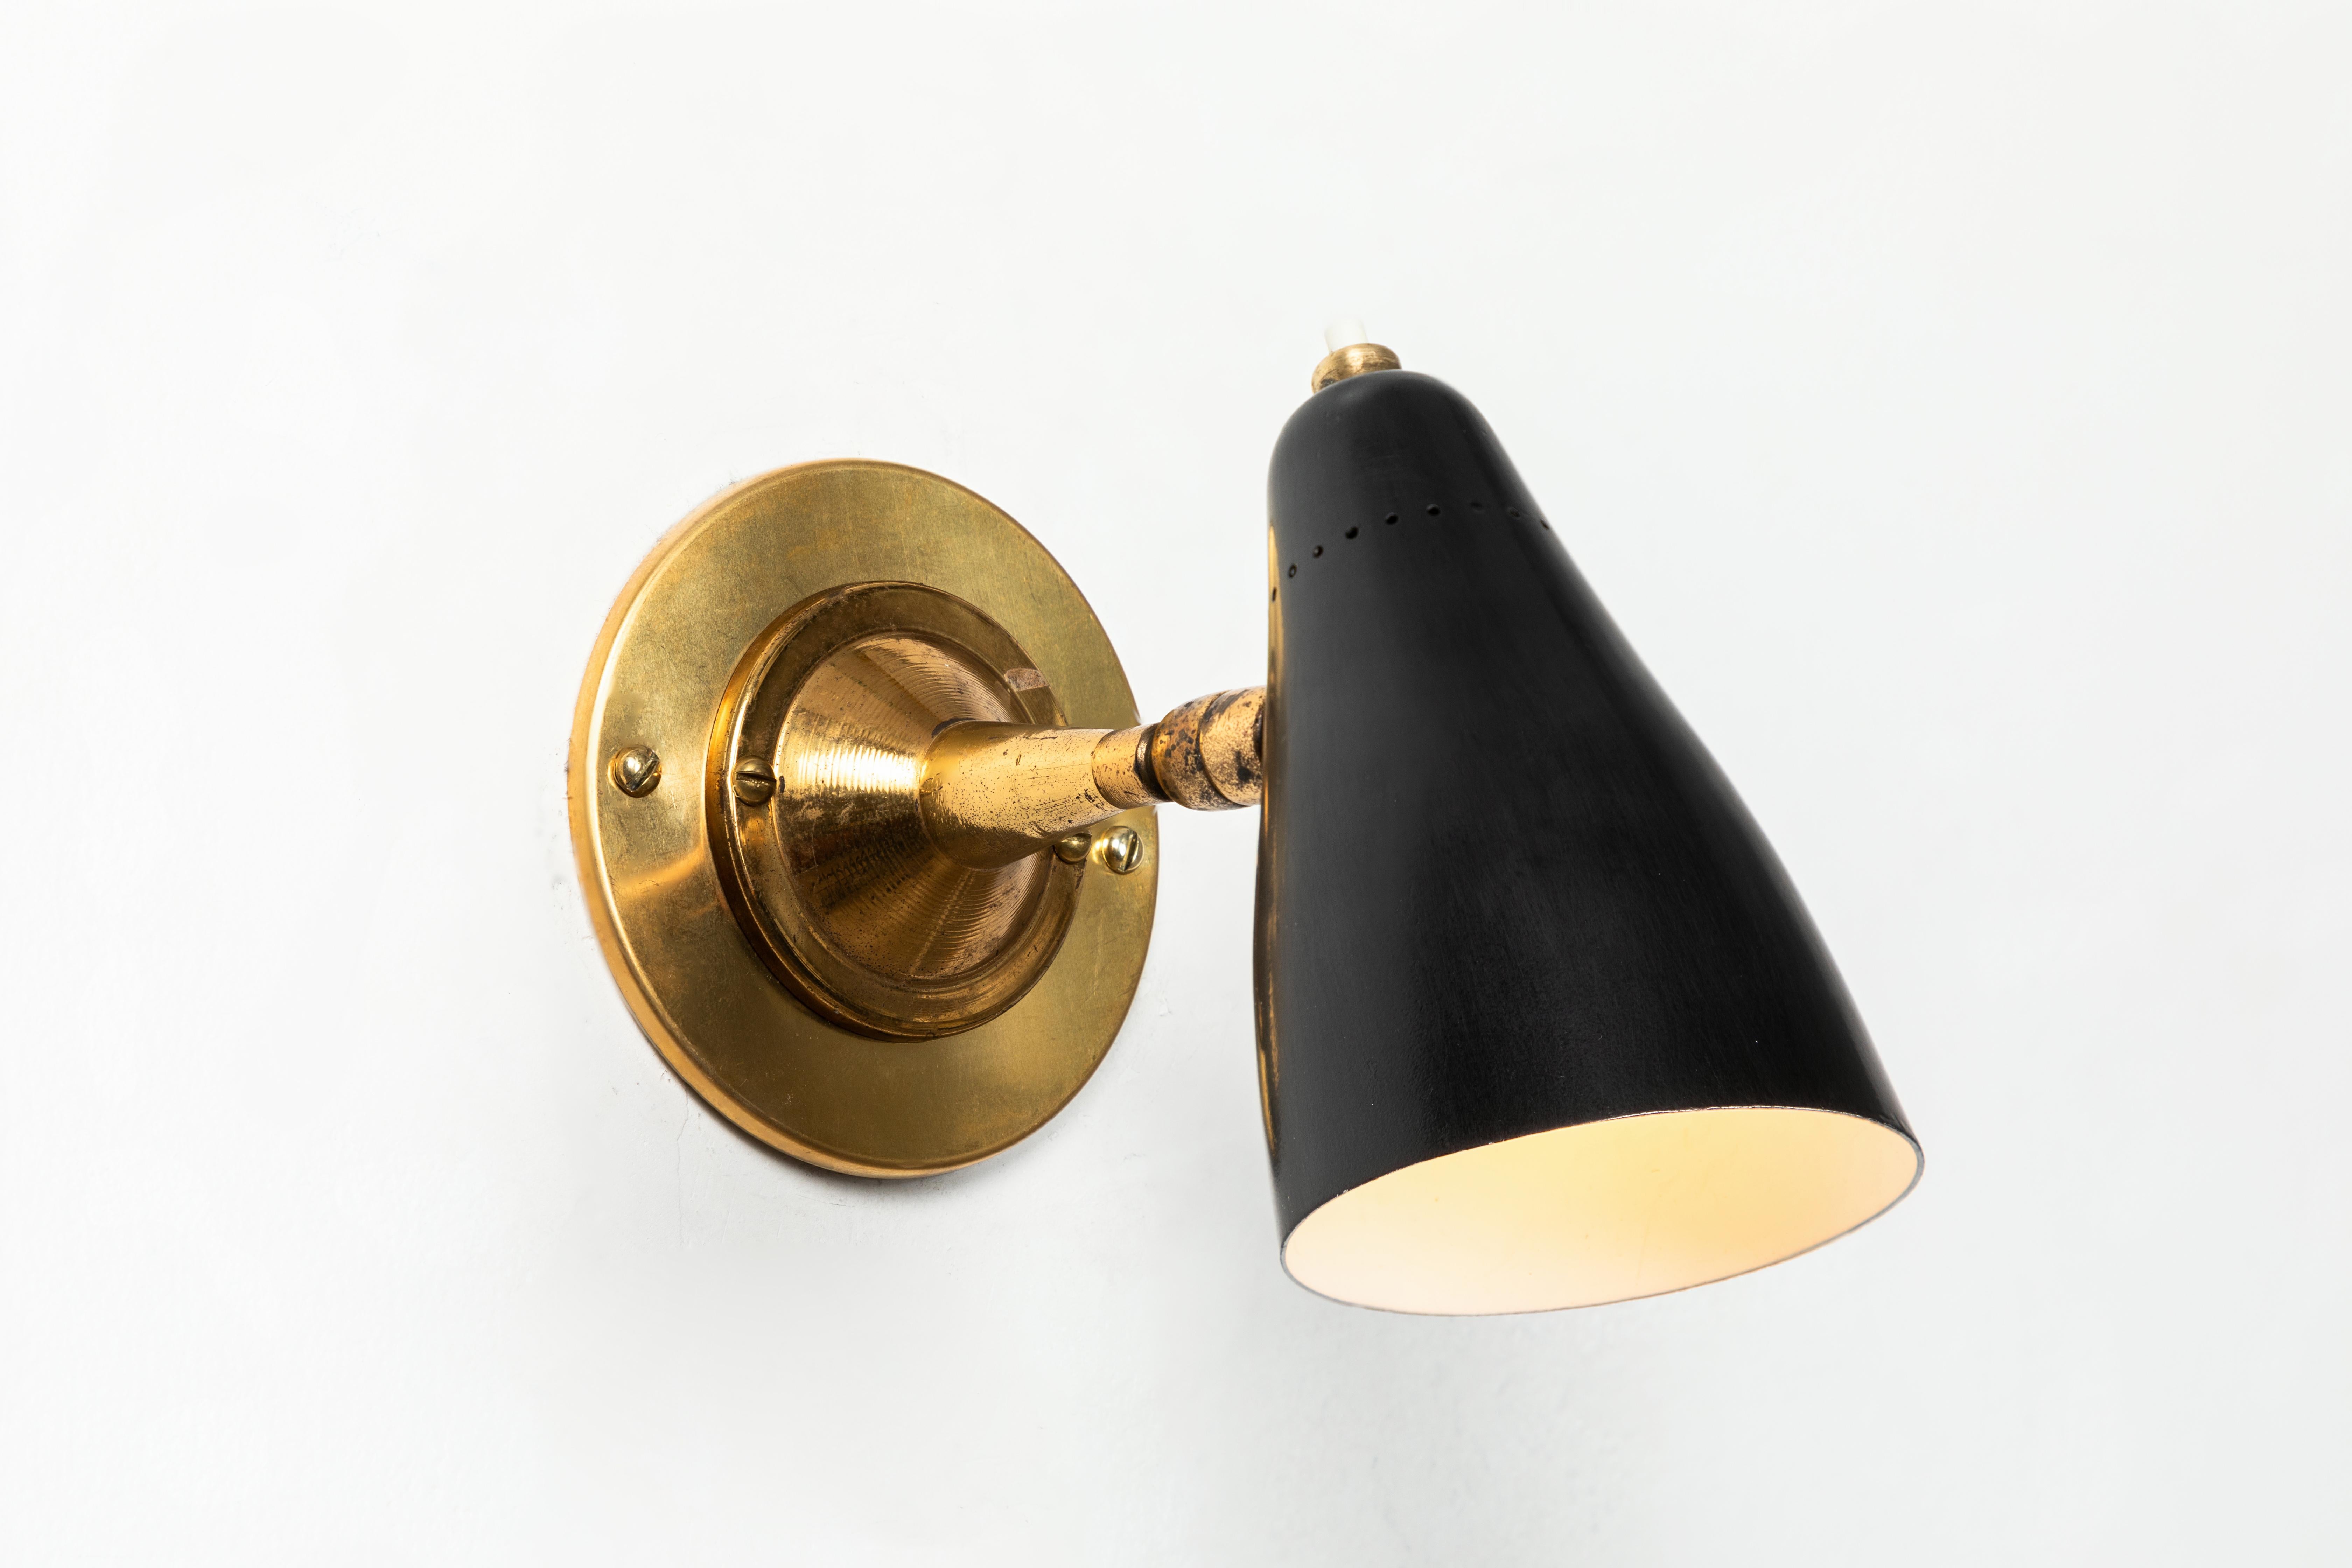 1950s Giuseppe Ostuni articulating sconces for O-Luce. Executed in brass and black painted aluminium with perforated shade. Sconces pivot up/down and left/right on two separate ball joints. Original on/off switch on top of lamp. Wired for US